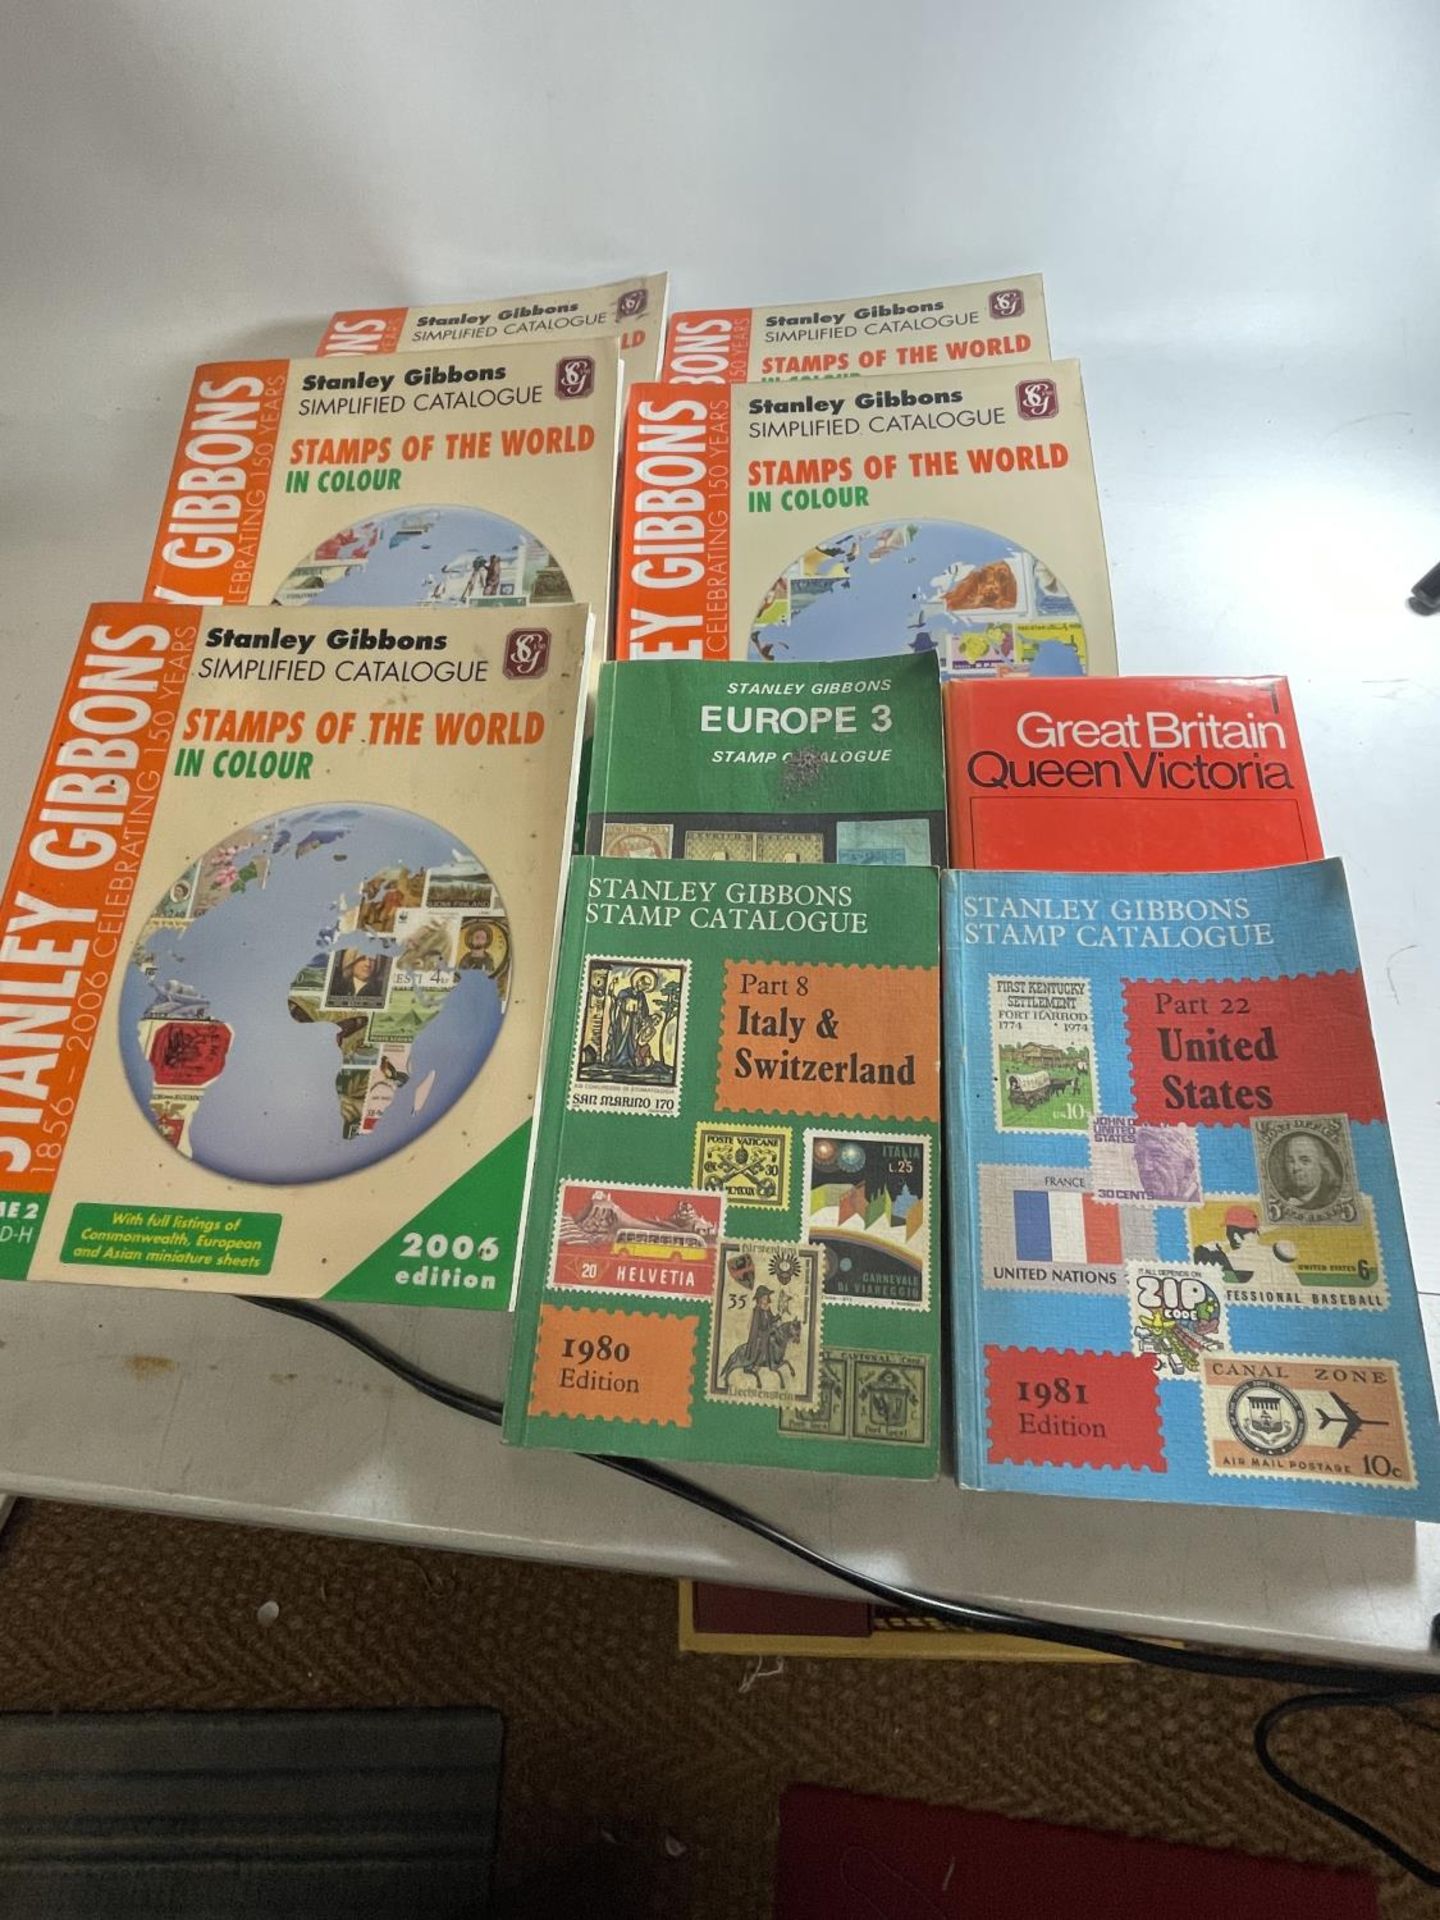 VOLUMES 1 - 5 OF THE 2006 EDITION OF STANLEY GIBBONS STAMP DIRECTORIES PLUS FOUR OTHER STAMP BOOKS